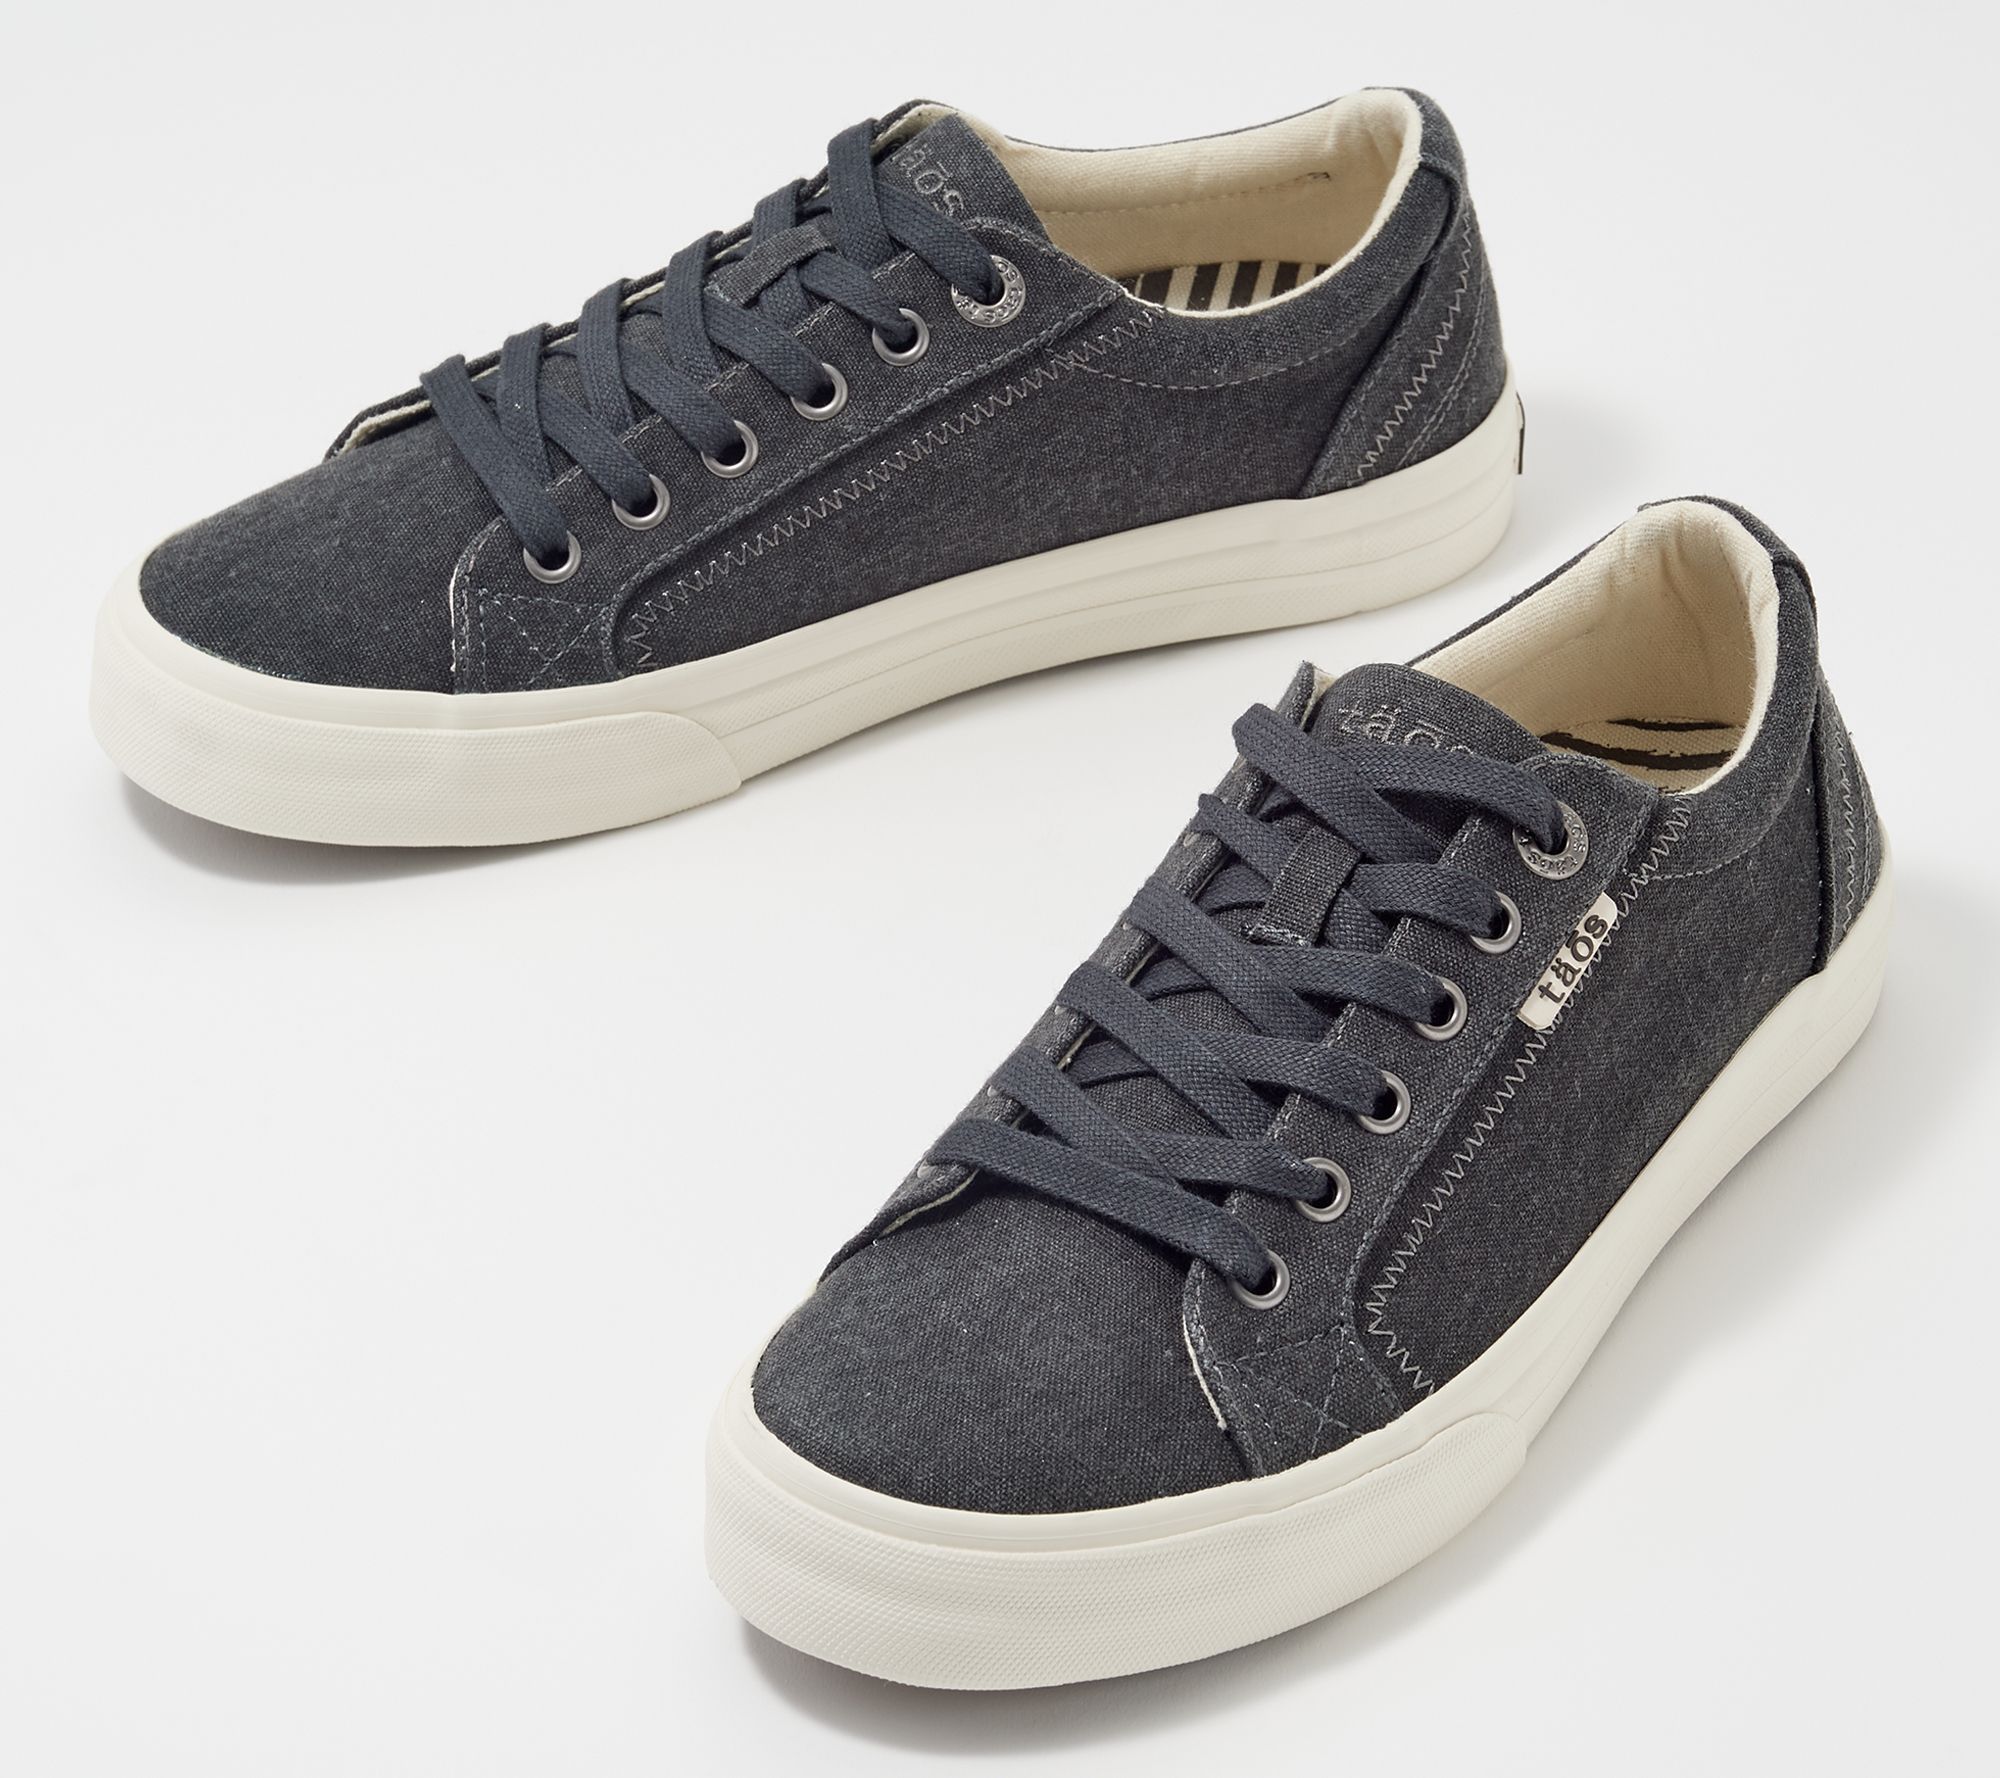 taos canvas sneakers